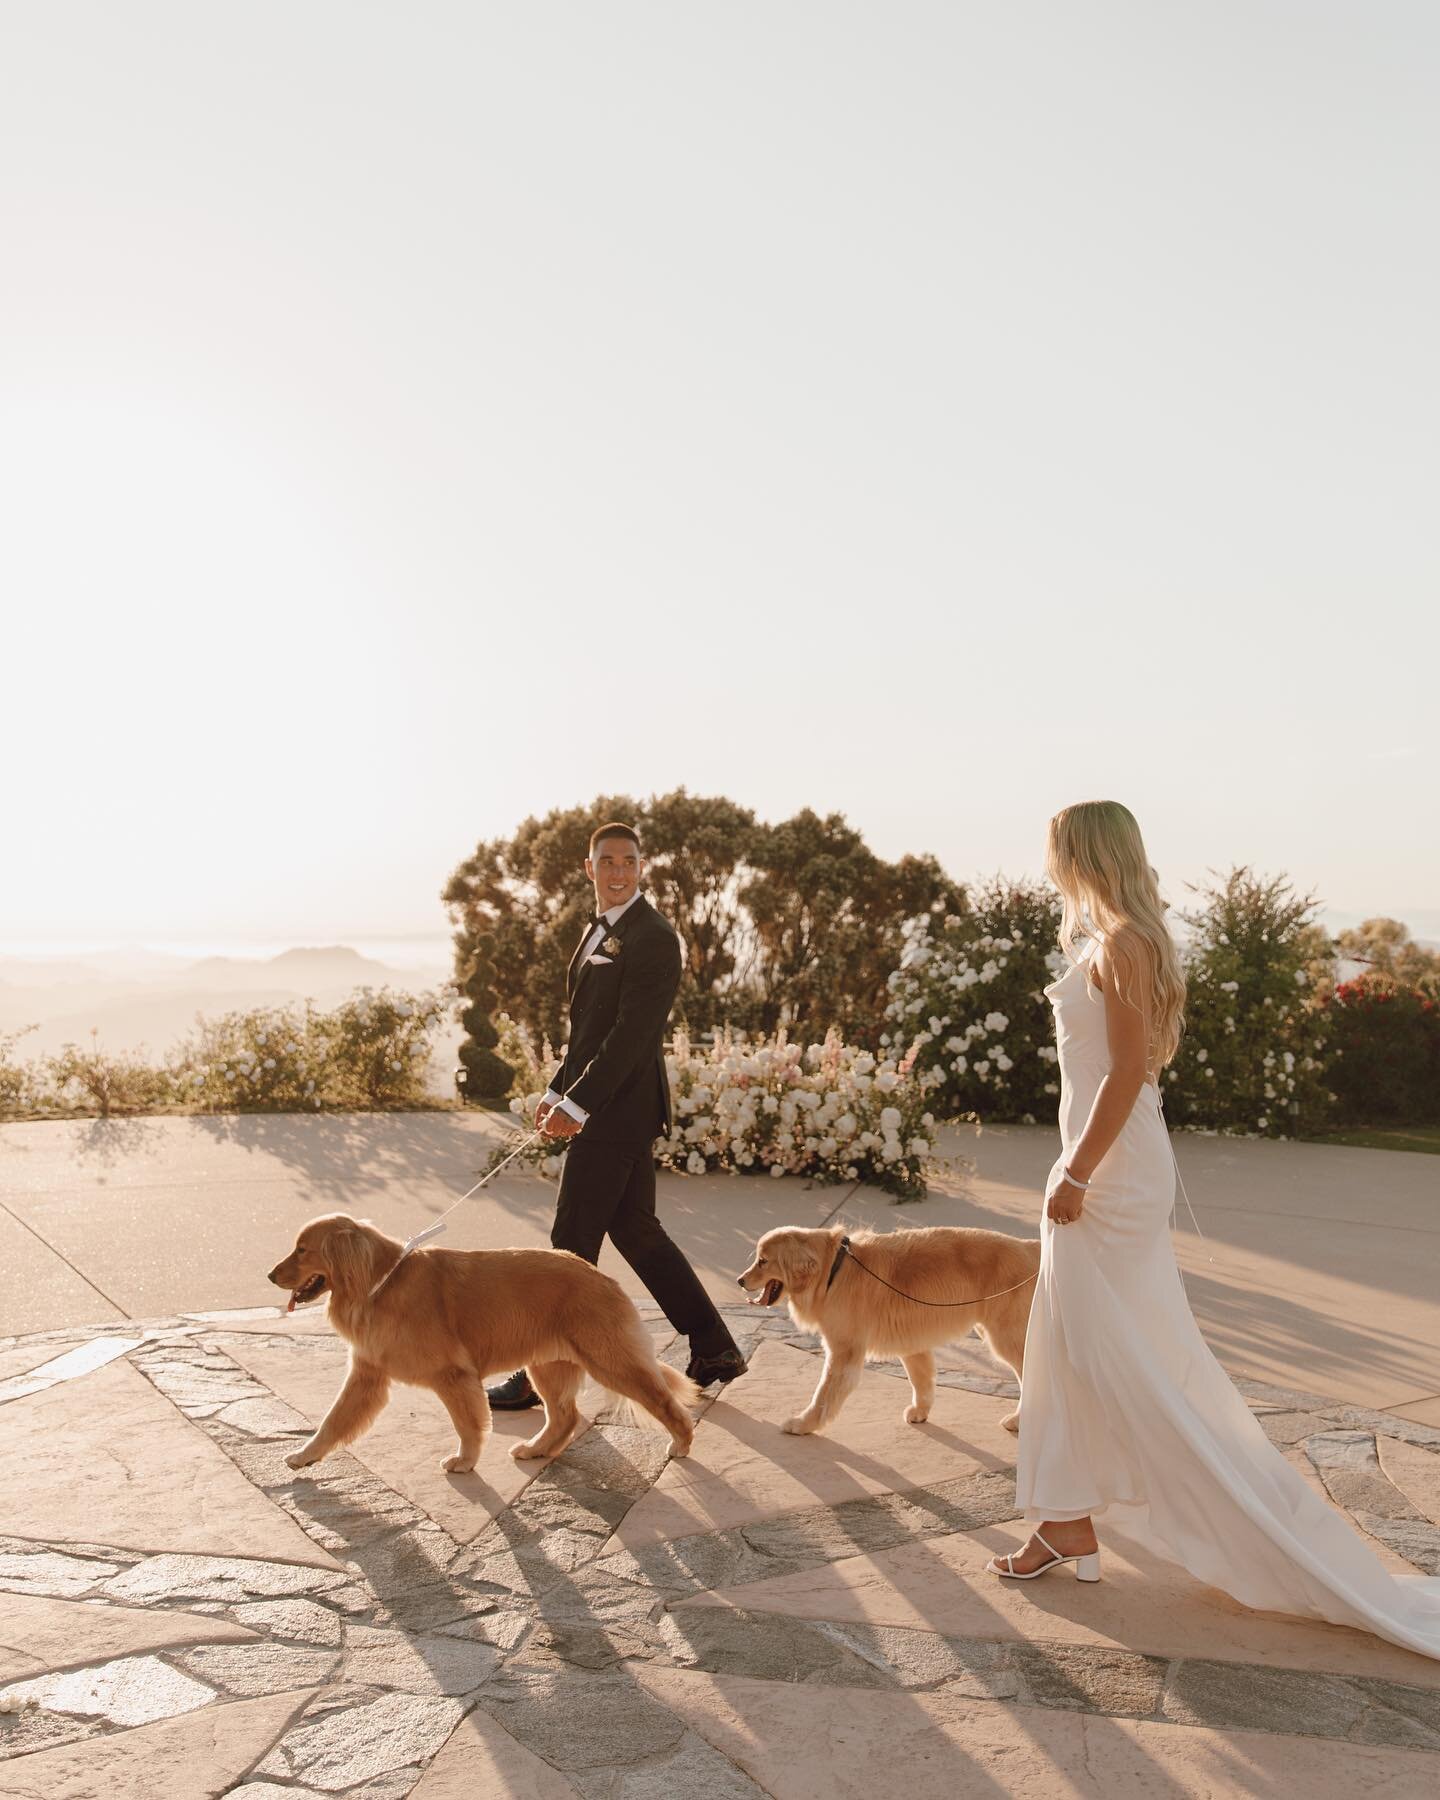 EEEEE yesterday was a DREAM so here&rsquo;s a little sneak into the magic 🫶🏼✨🌅

stay tuned bc I&rsquo;ll have loads more to share 🤍

#malibuweddingphotographer #malibuelopement #malibuwedding #malibucalifornia #shesaidyes #dreamwedding #malibuelo